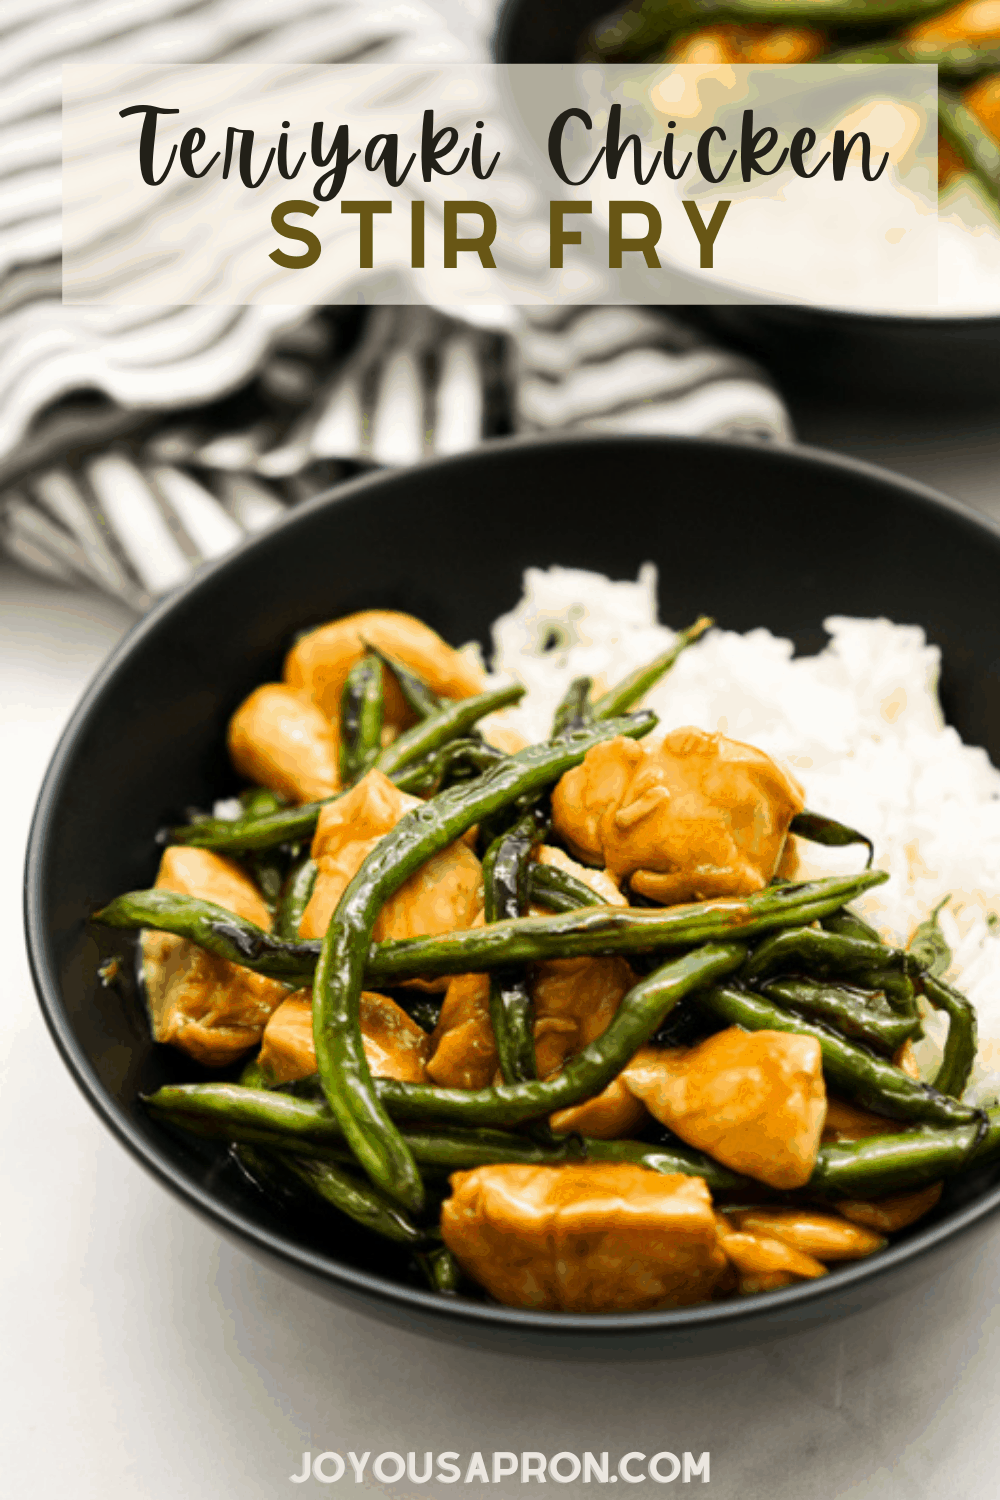 Teriyaki Chicken Stir Fry -easy homemade Japanese inspired teriyaki recipe! Juicy white meat chicken and green beans coated in homemade Teriyaki Sauce makes for a quick and delicious dinner ready under 30 minutes! via @joyousapron